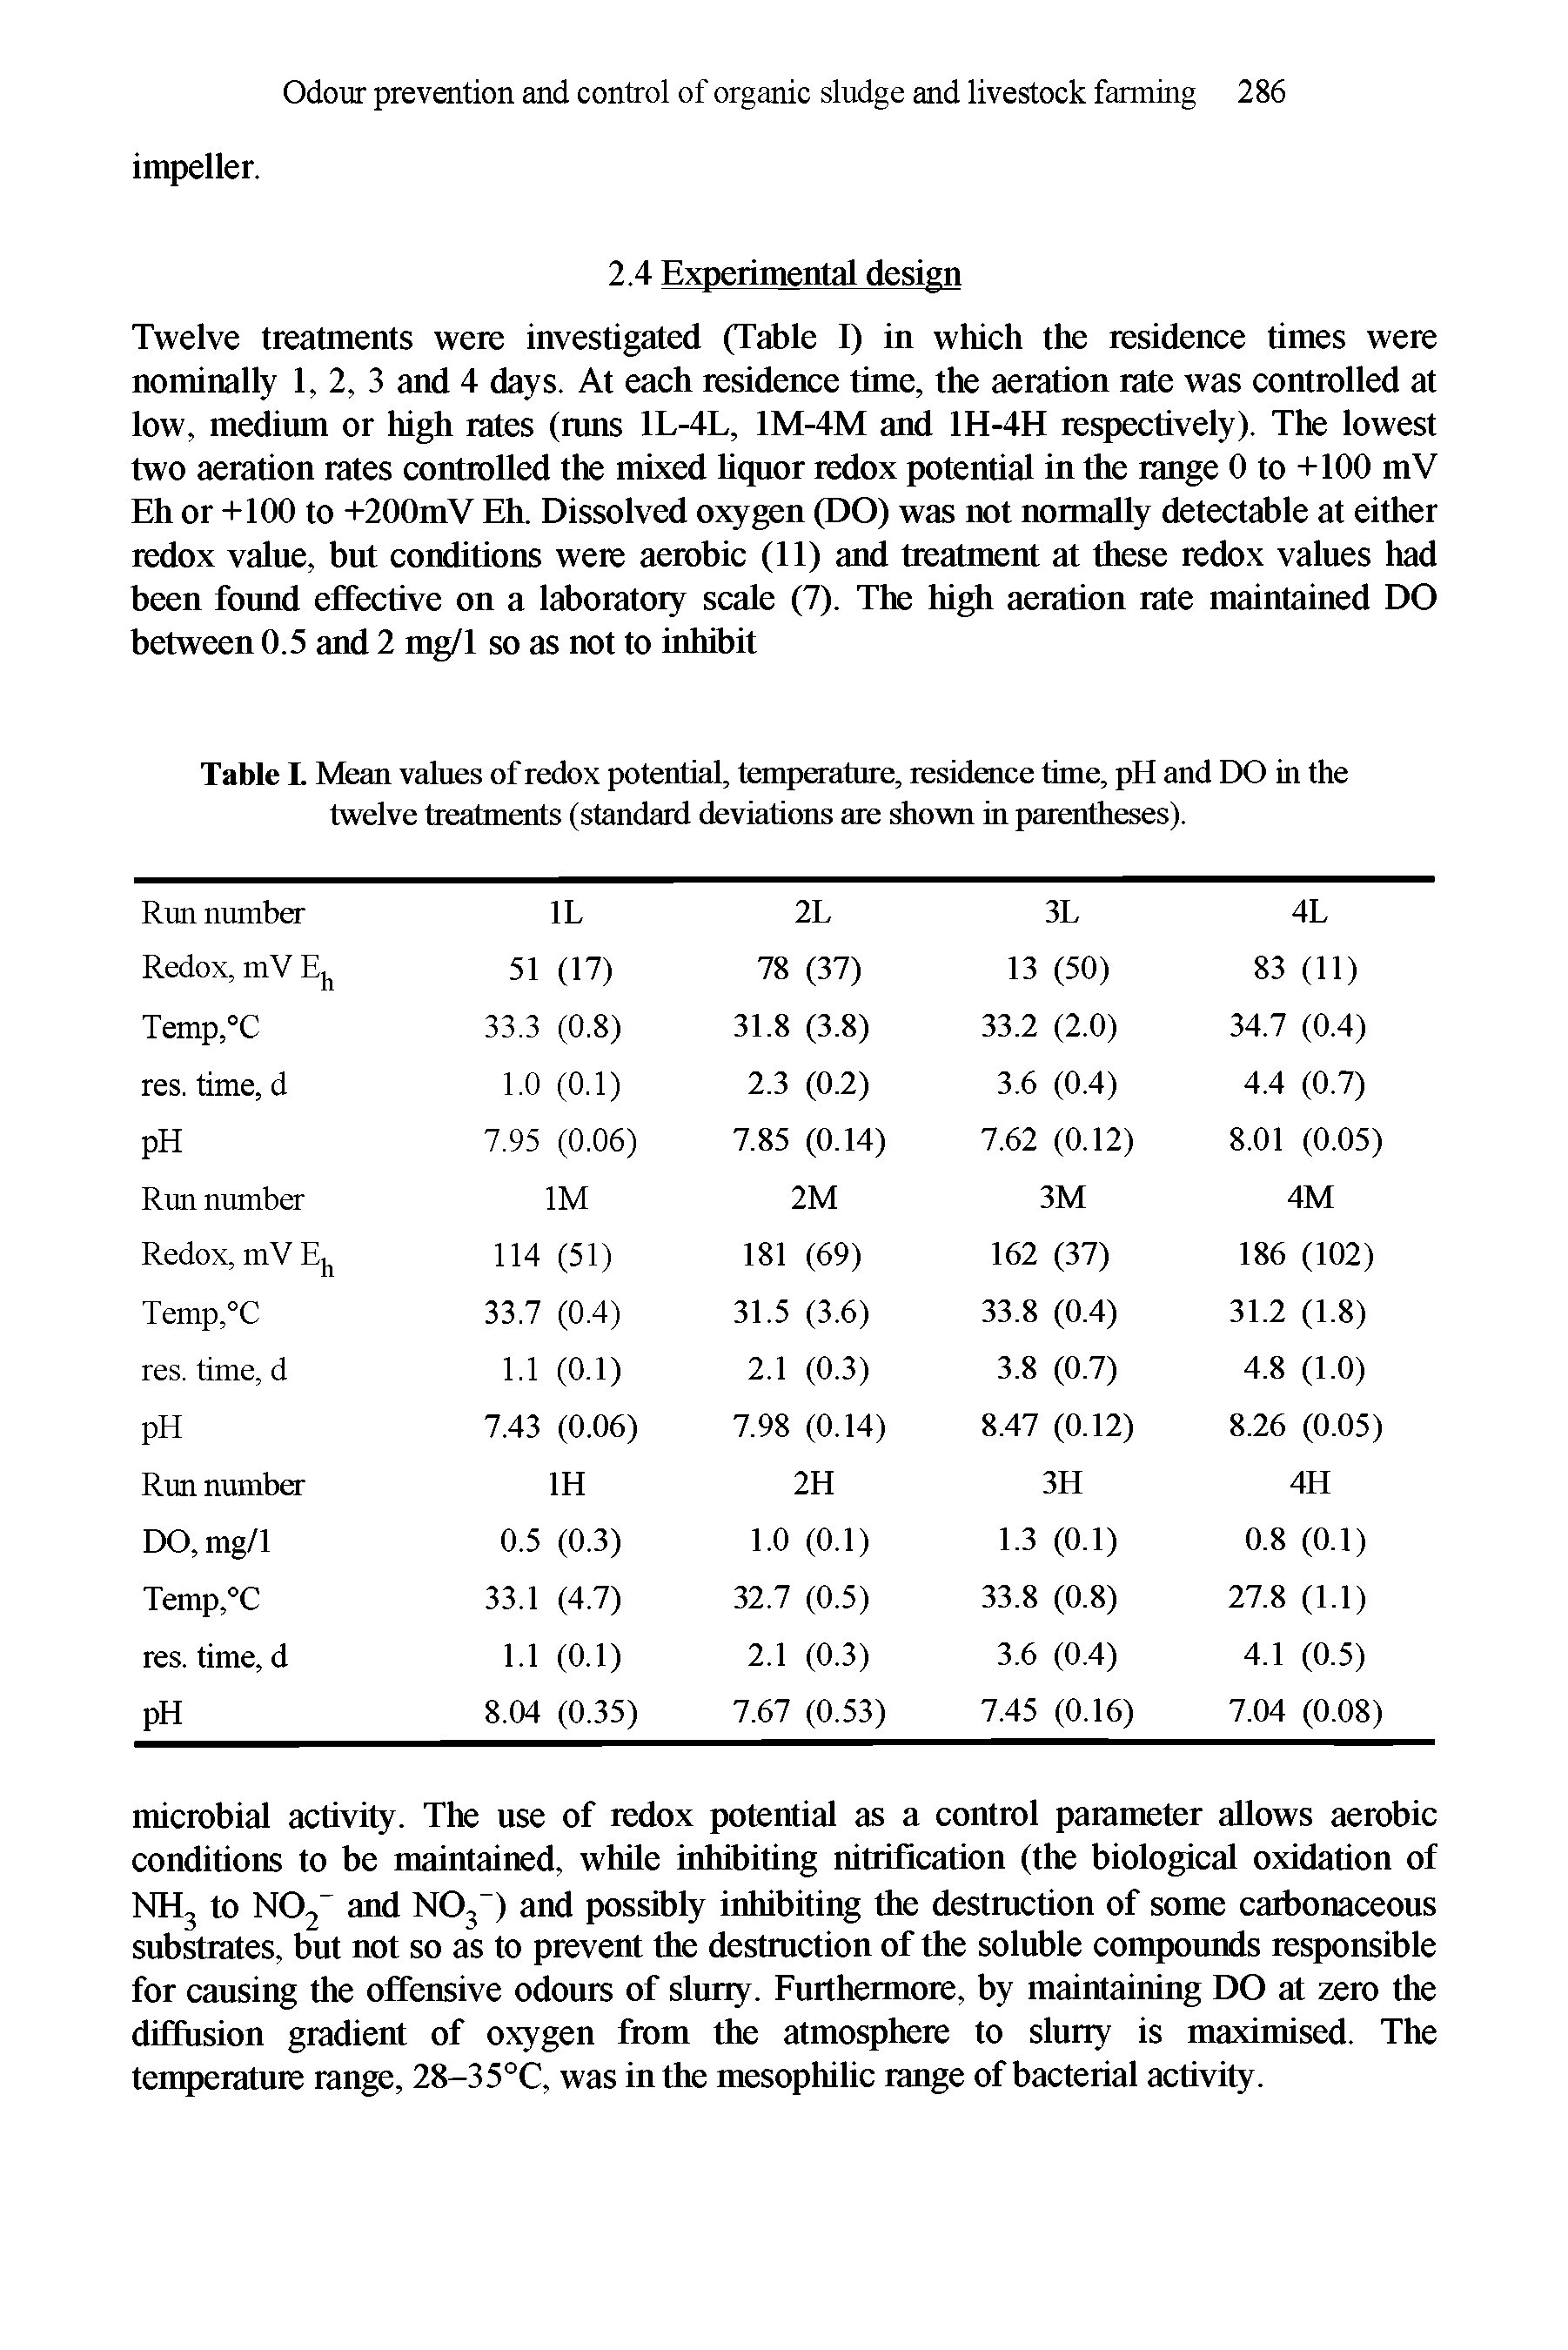 Table L Mean values of redox potential, temperature, residence time, pH and DO in the twelve treatments (standard deviations are shown in parentheses).